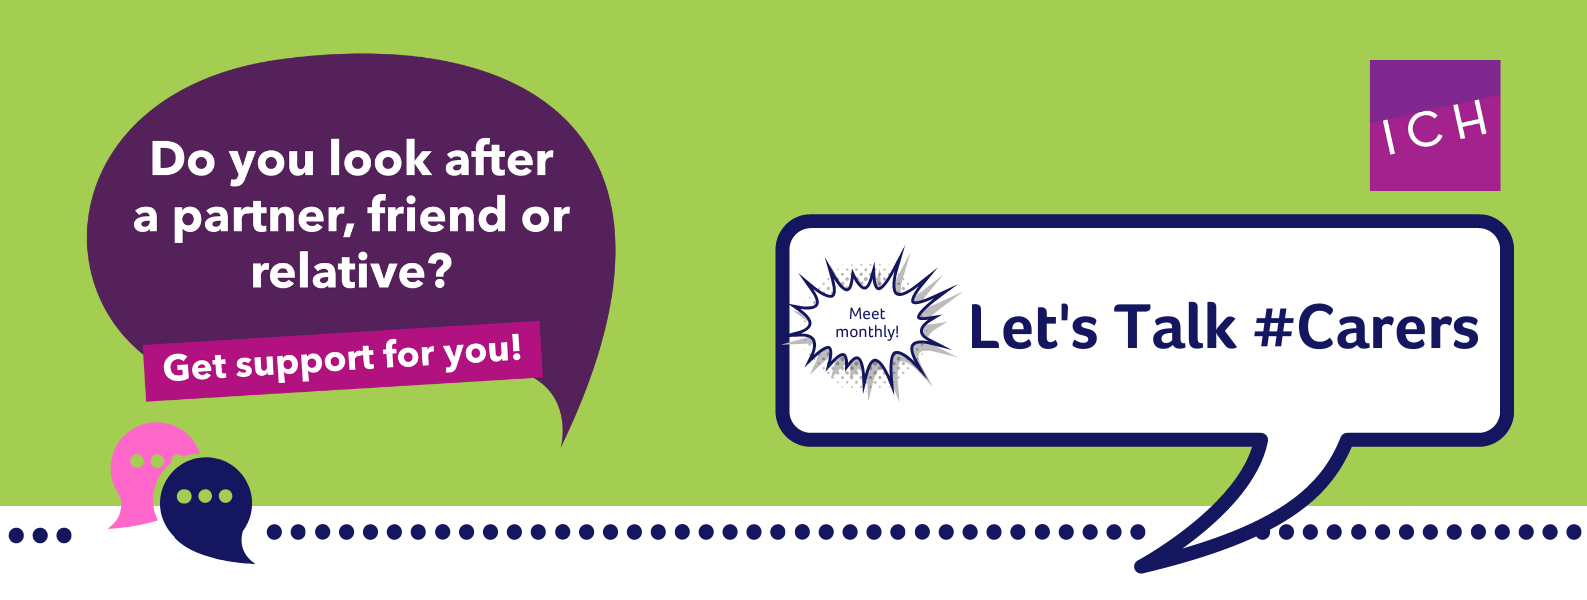 Do you look after a partner, friend or relative?  Get support for you! Let's Talk Carers banner